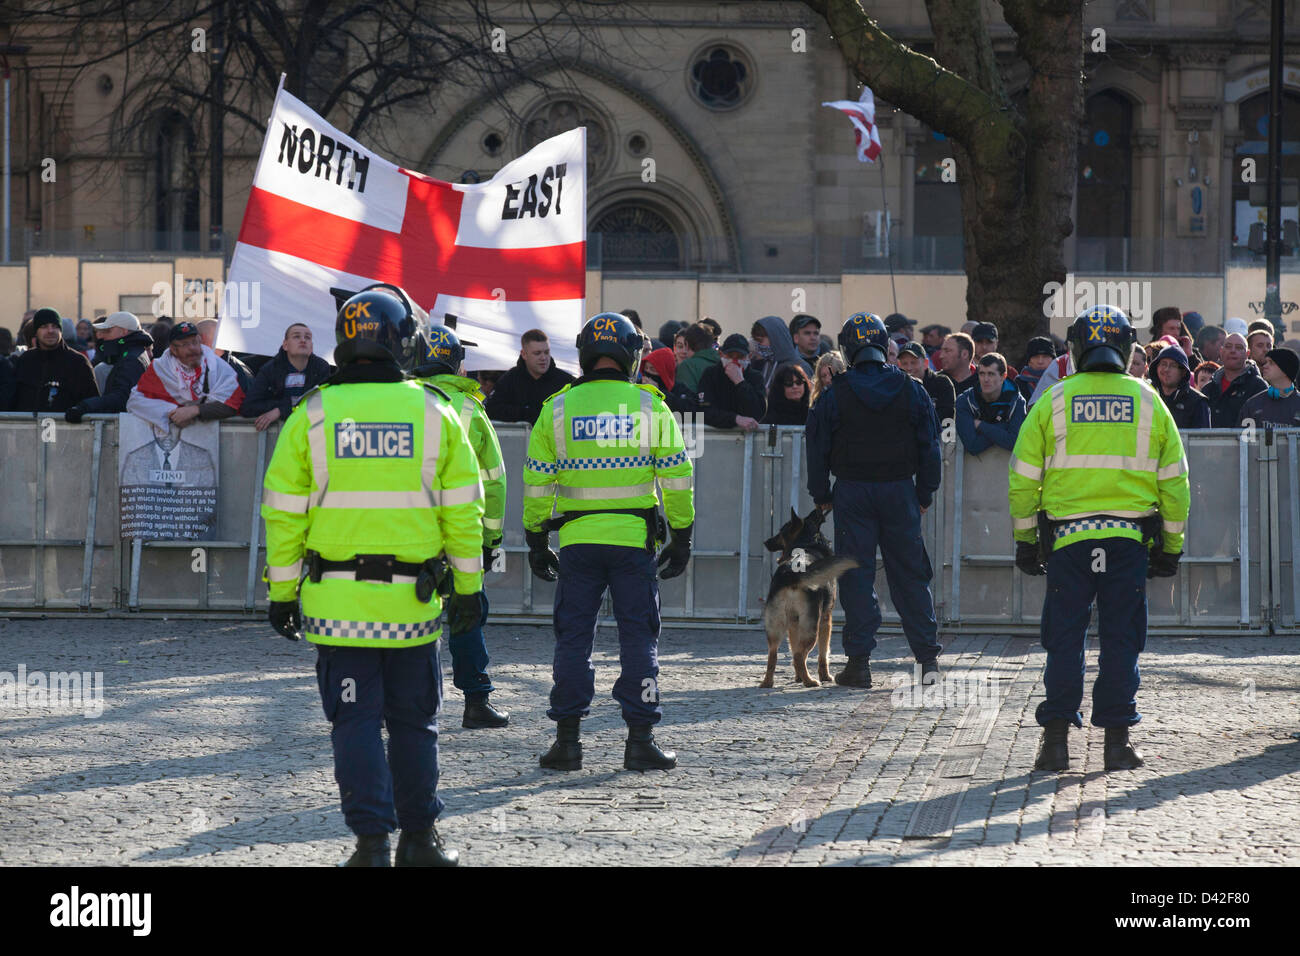 Manchester, UK. 2nd March 2013. Members of the far-right English Defence League (EDL) clash with police during a protest in Manchester. Approximately 300 members of the 'Islamophobic' group attended. police supervision was strict involving dogs and horses kept apart the UAF and the EDL. Credit: Lydia Pagoni/Alamy Live News Stock Photo